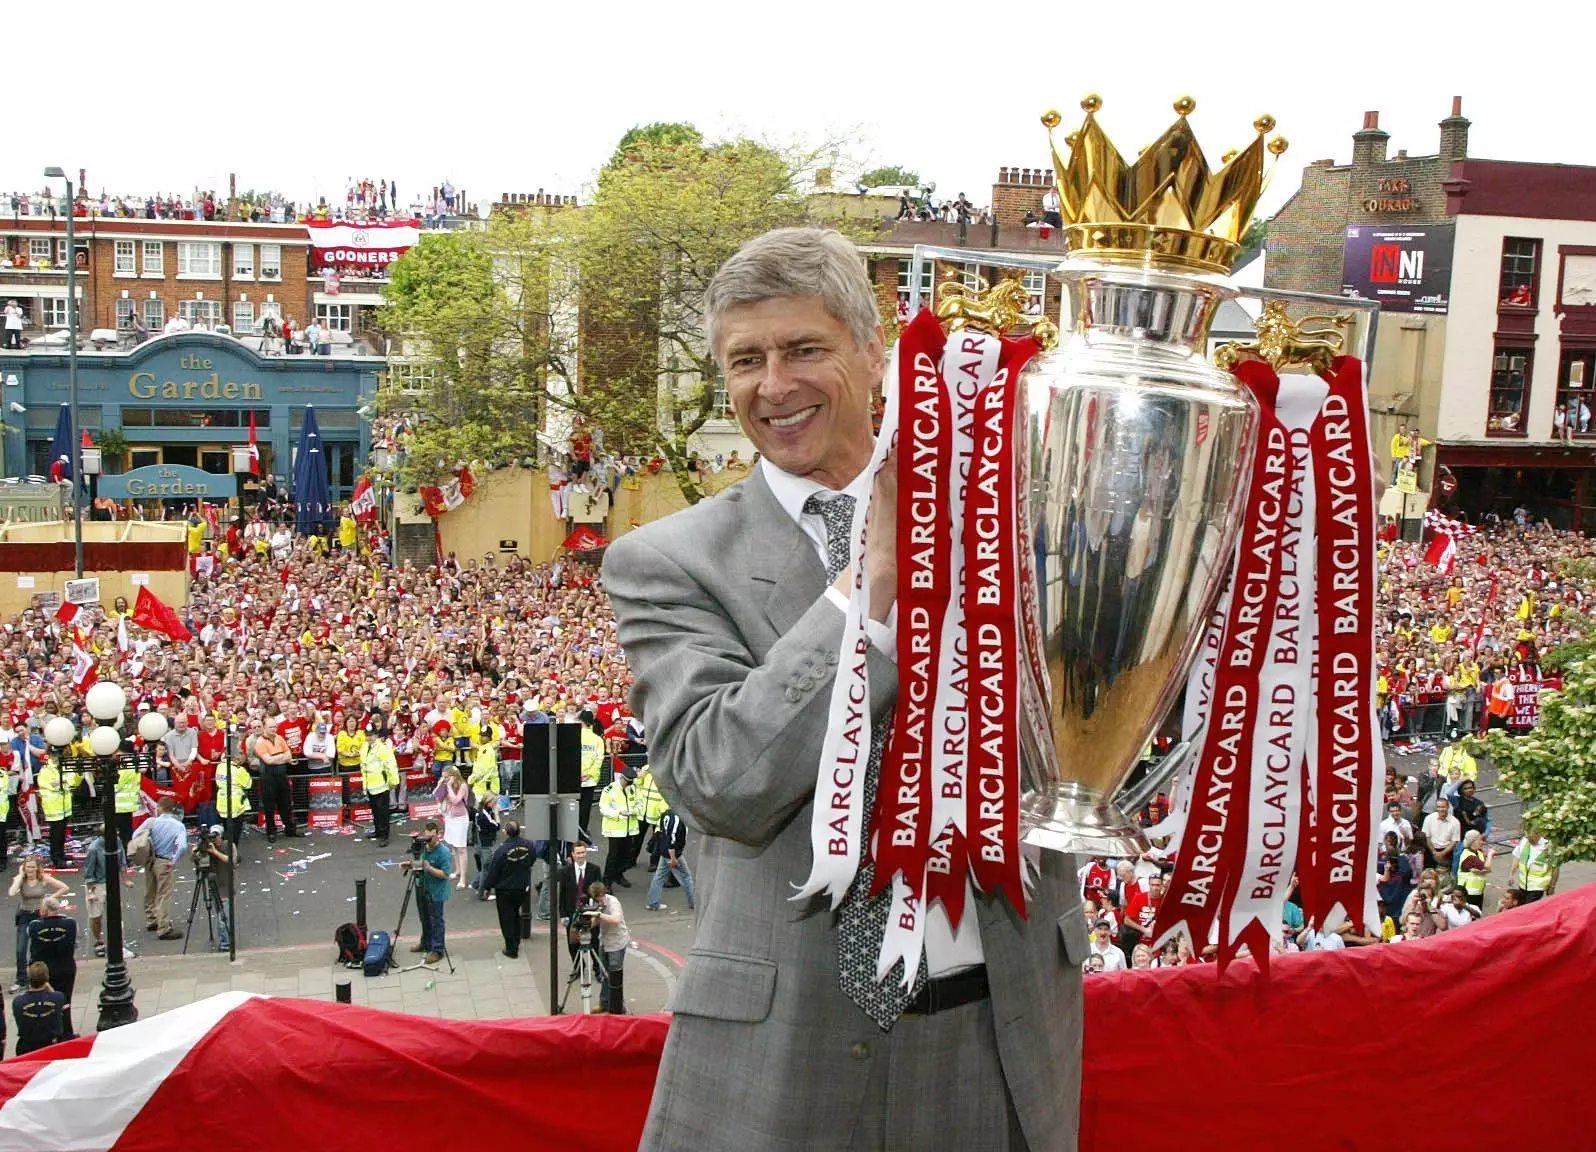 It's 14 years since the Invincibles and that's the last time Arsenal won the league. Image: PA Images.